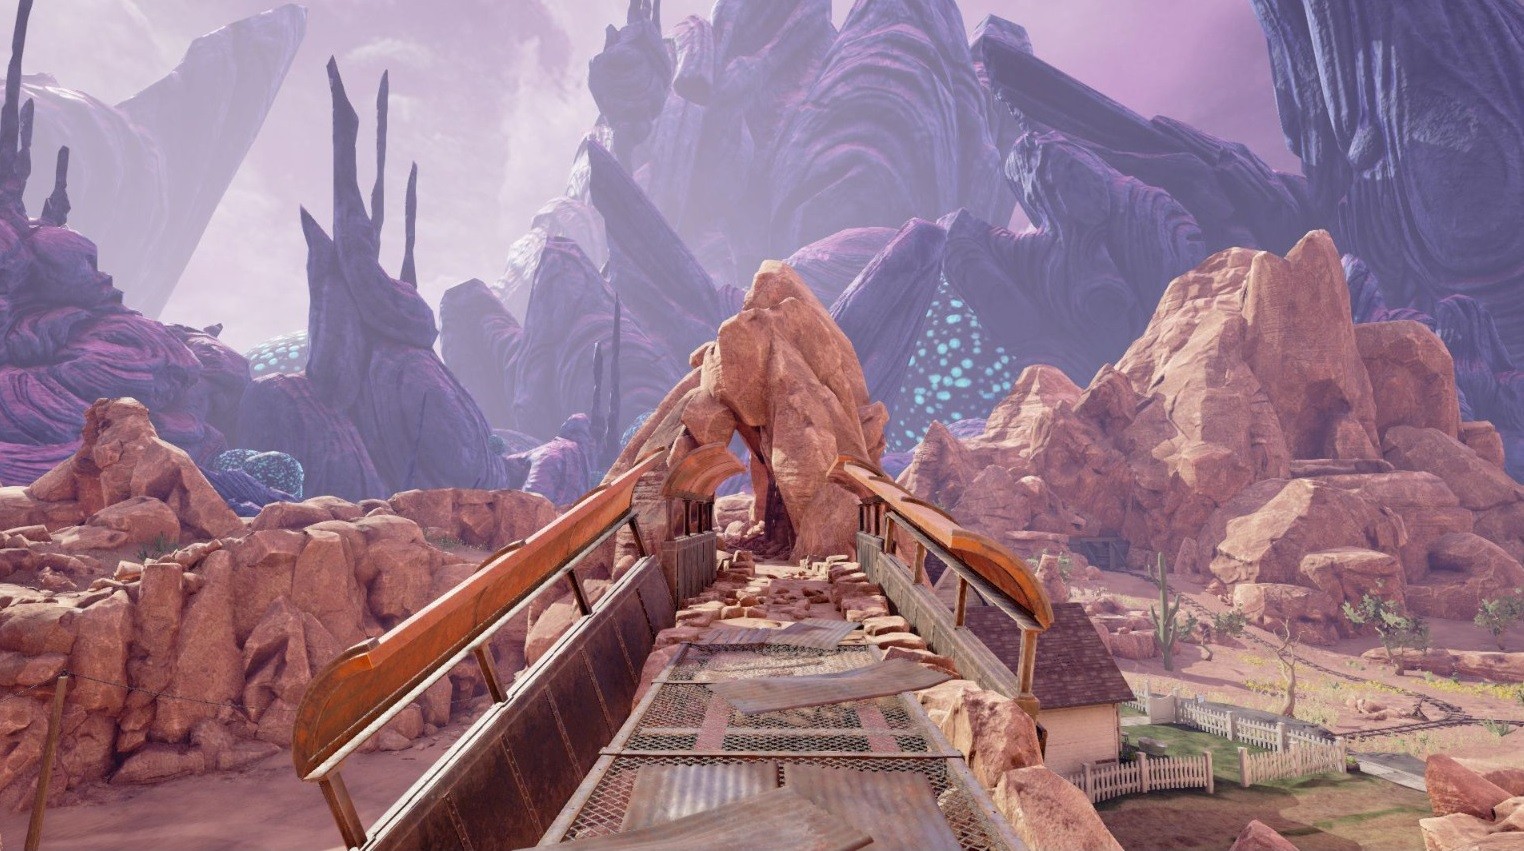 download obduction video game